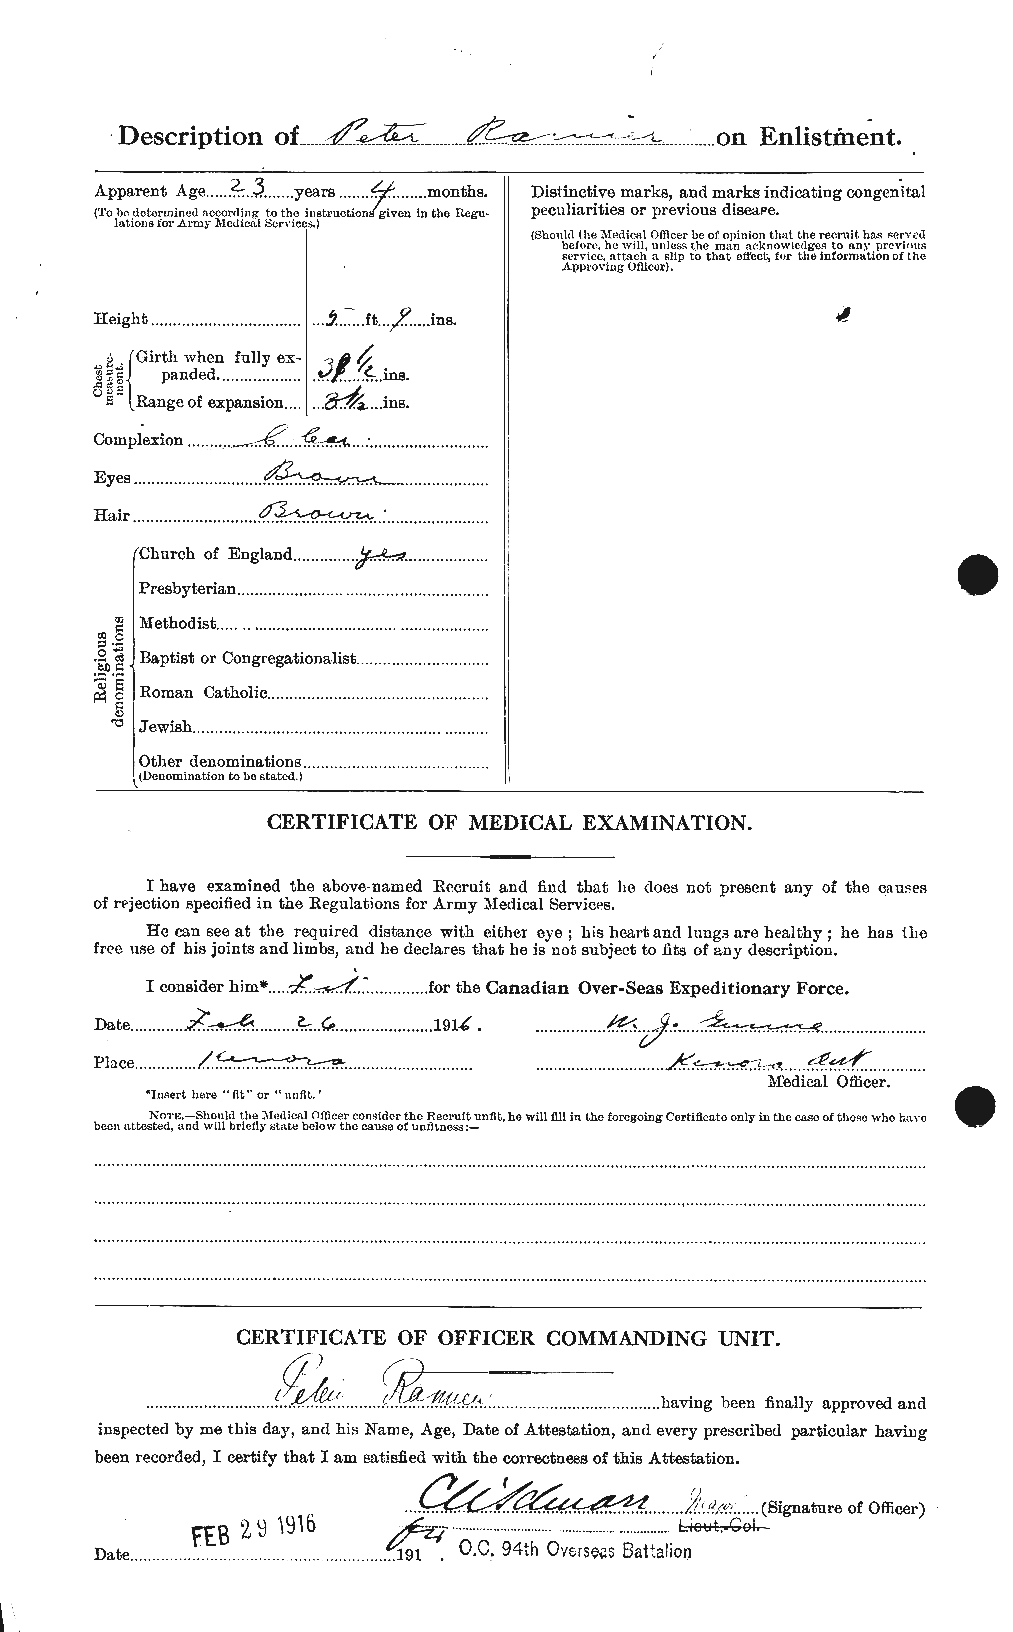 Personnel Records of the First World War - CEF 592382b